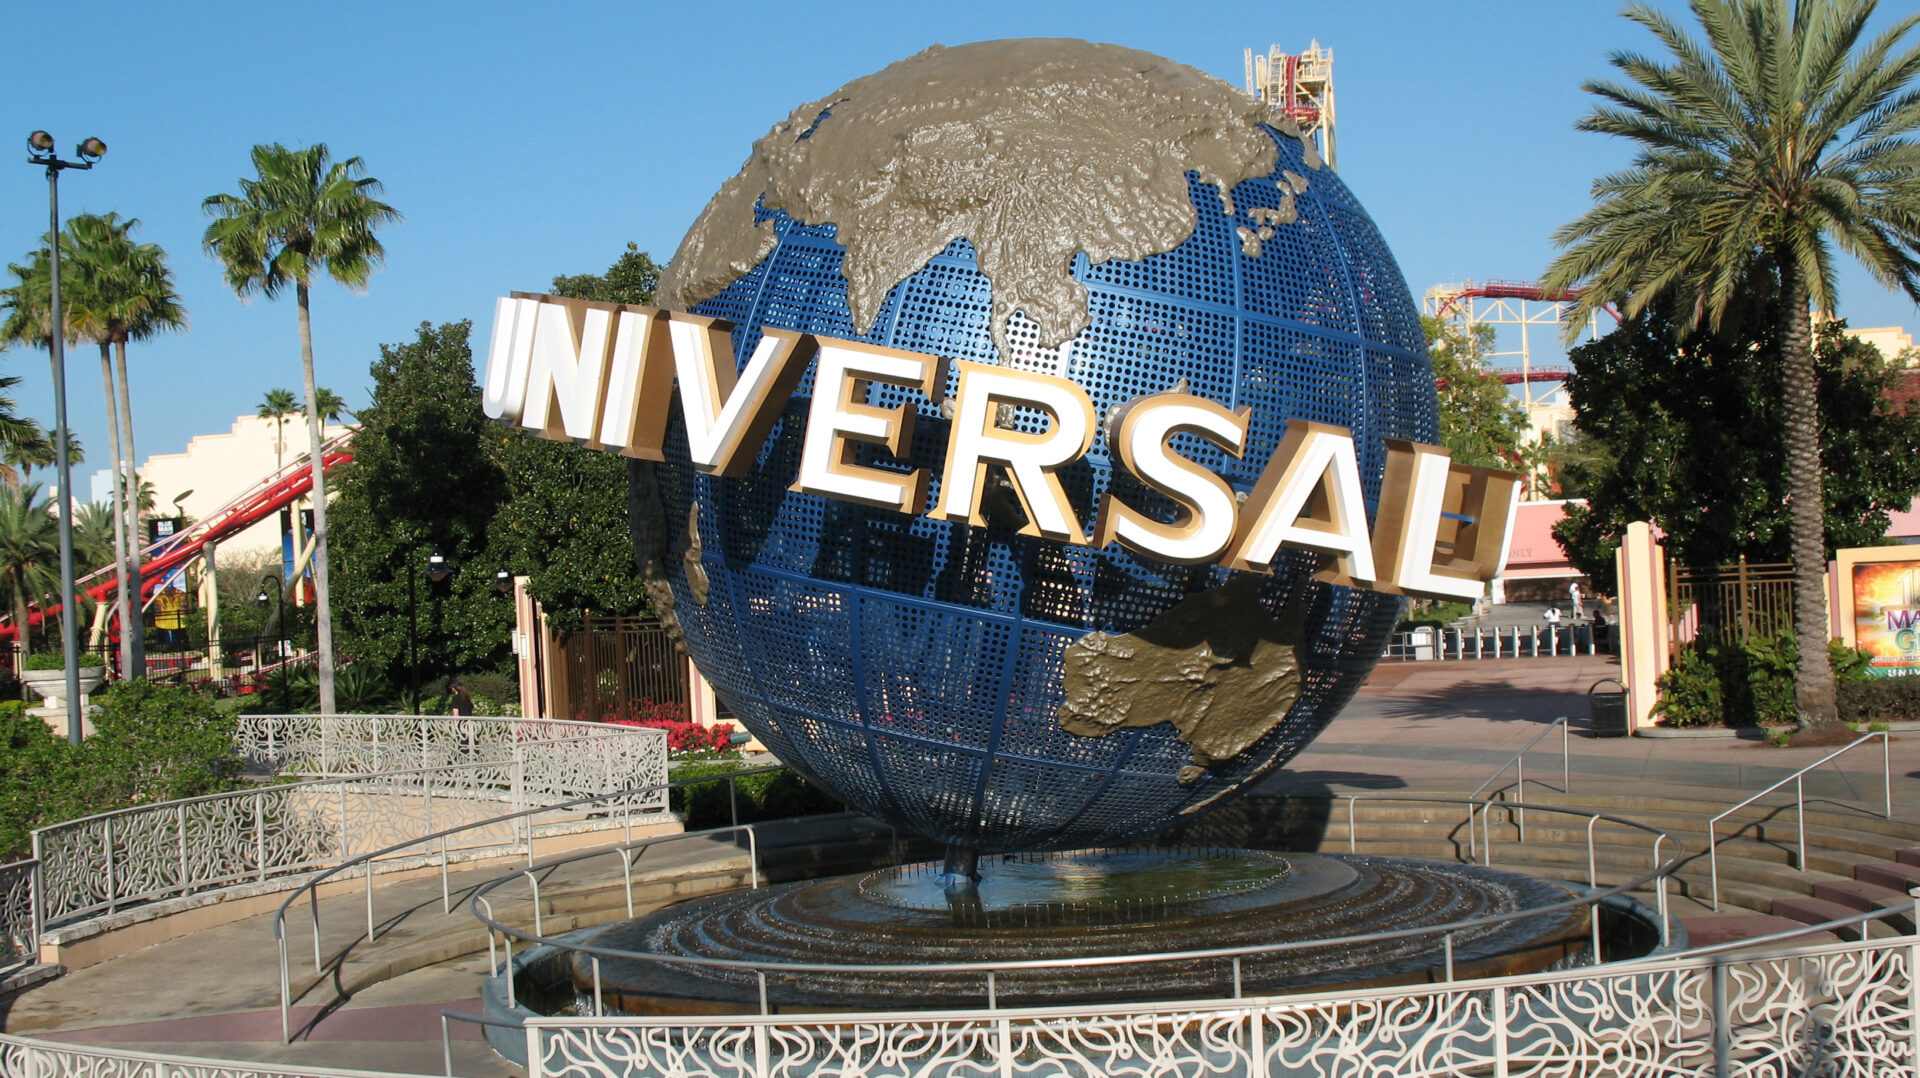 A picture of the global statue at the Universal Studio